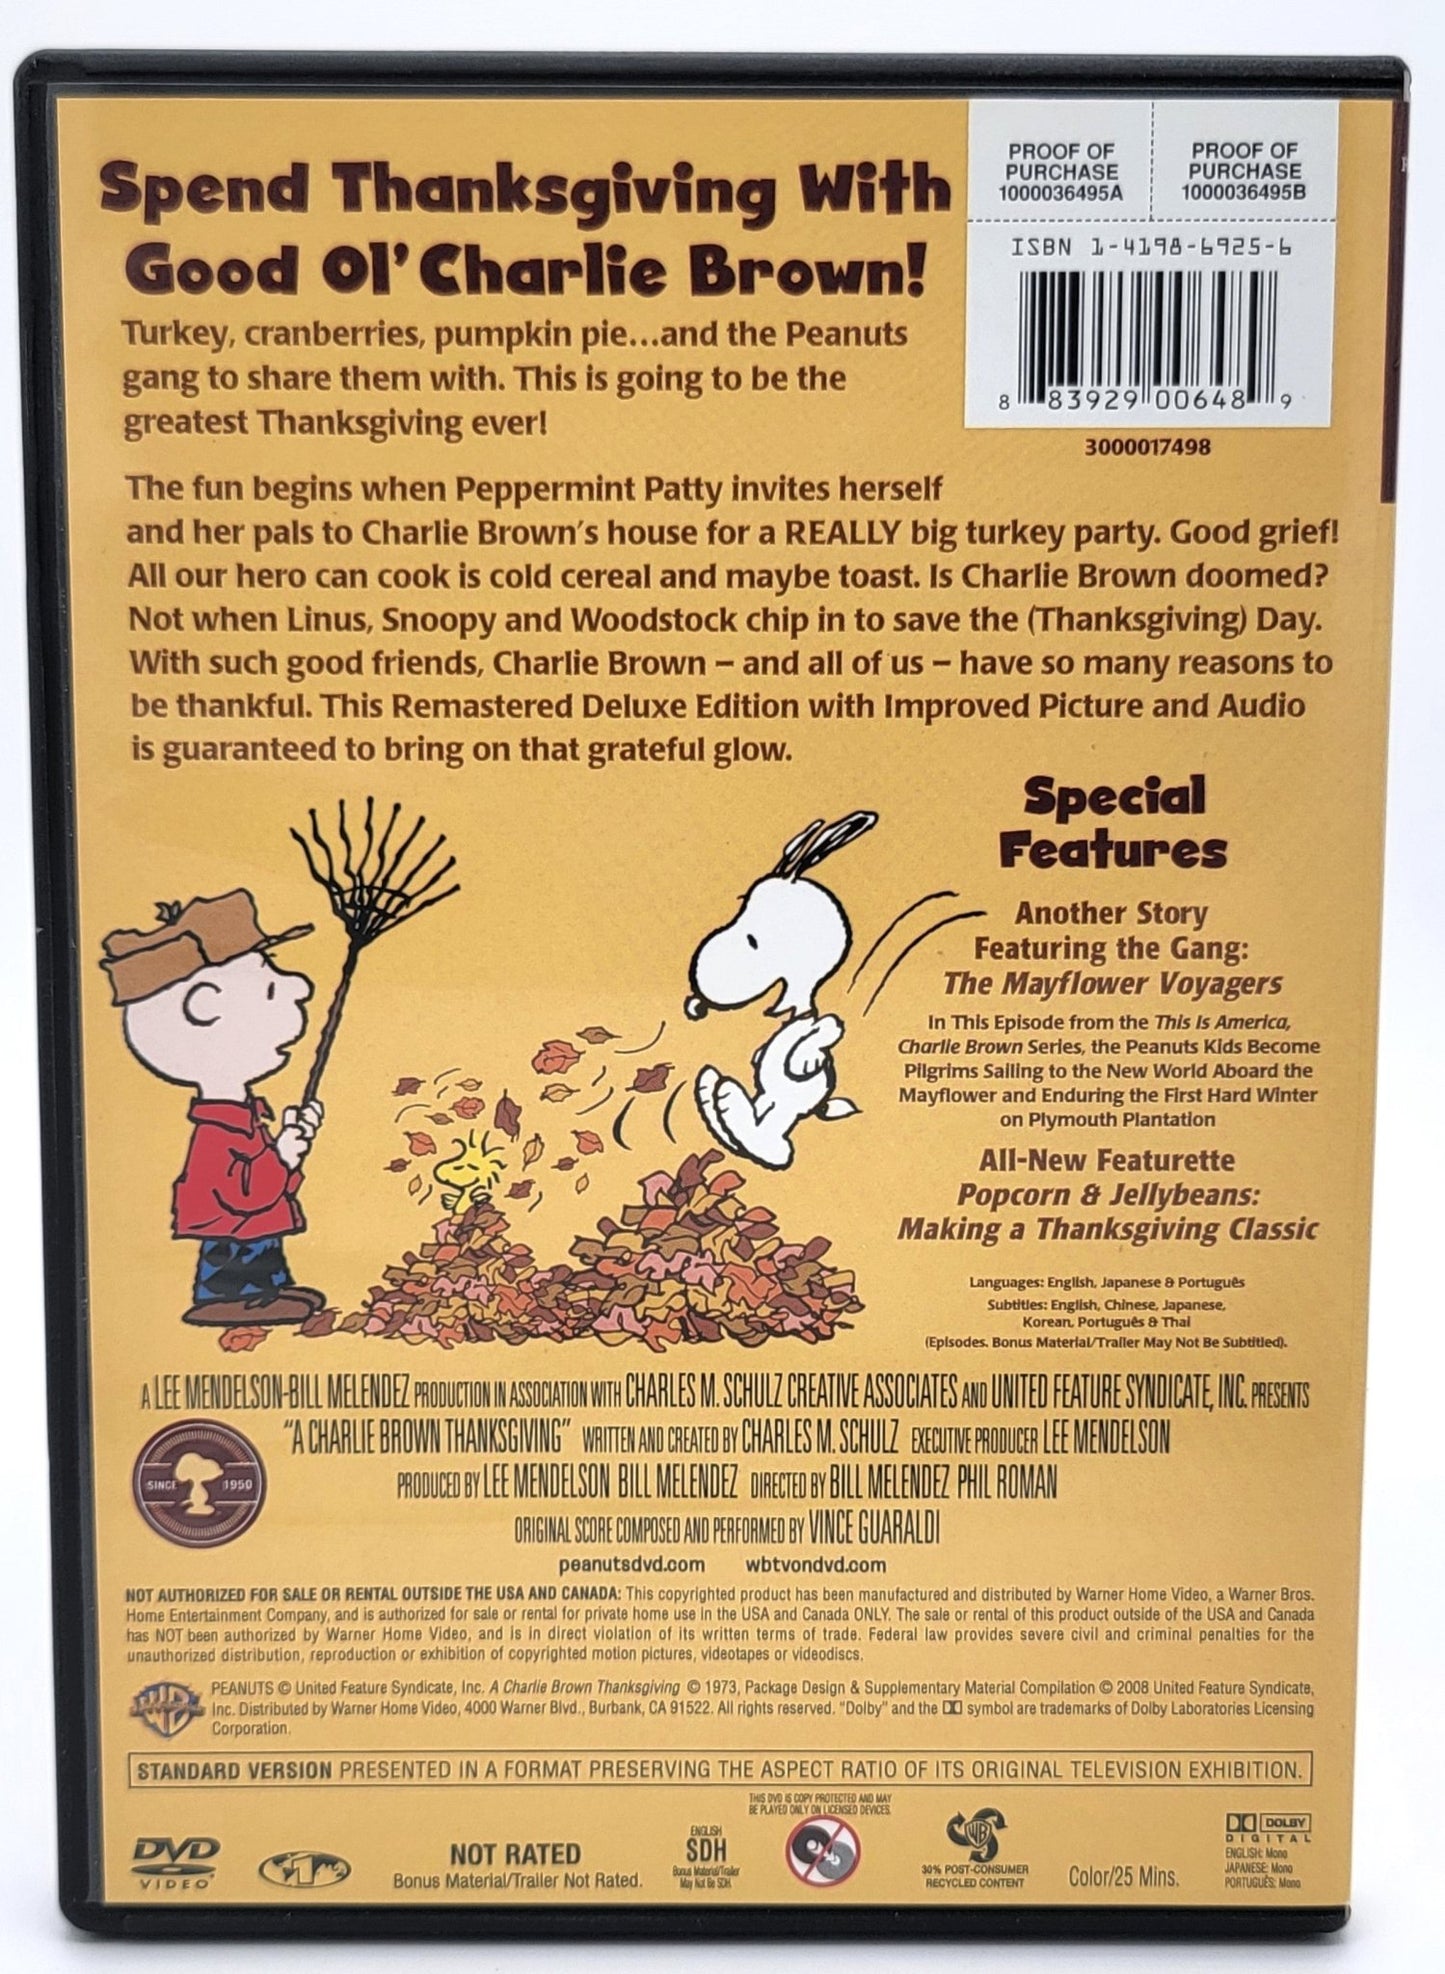 Warner Brothers - A Charlie Brown Thanksgiving | DVD | Remastered Deluxe Edition - DVD - Steady Bunny Shop